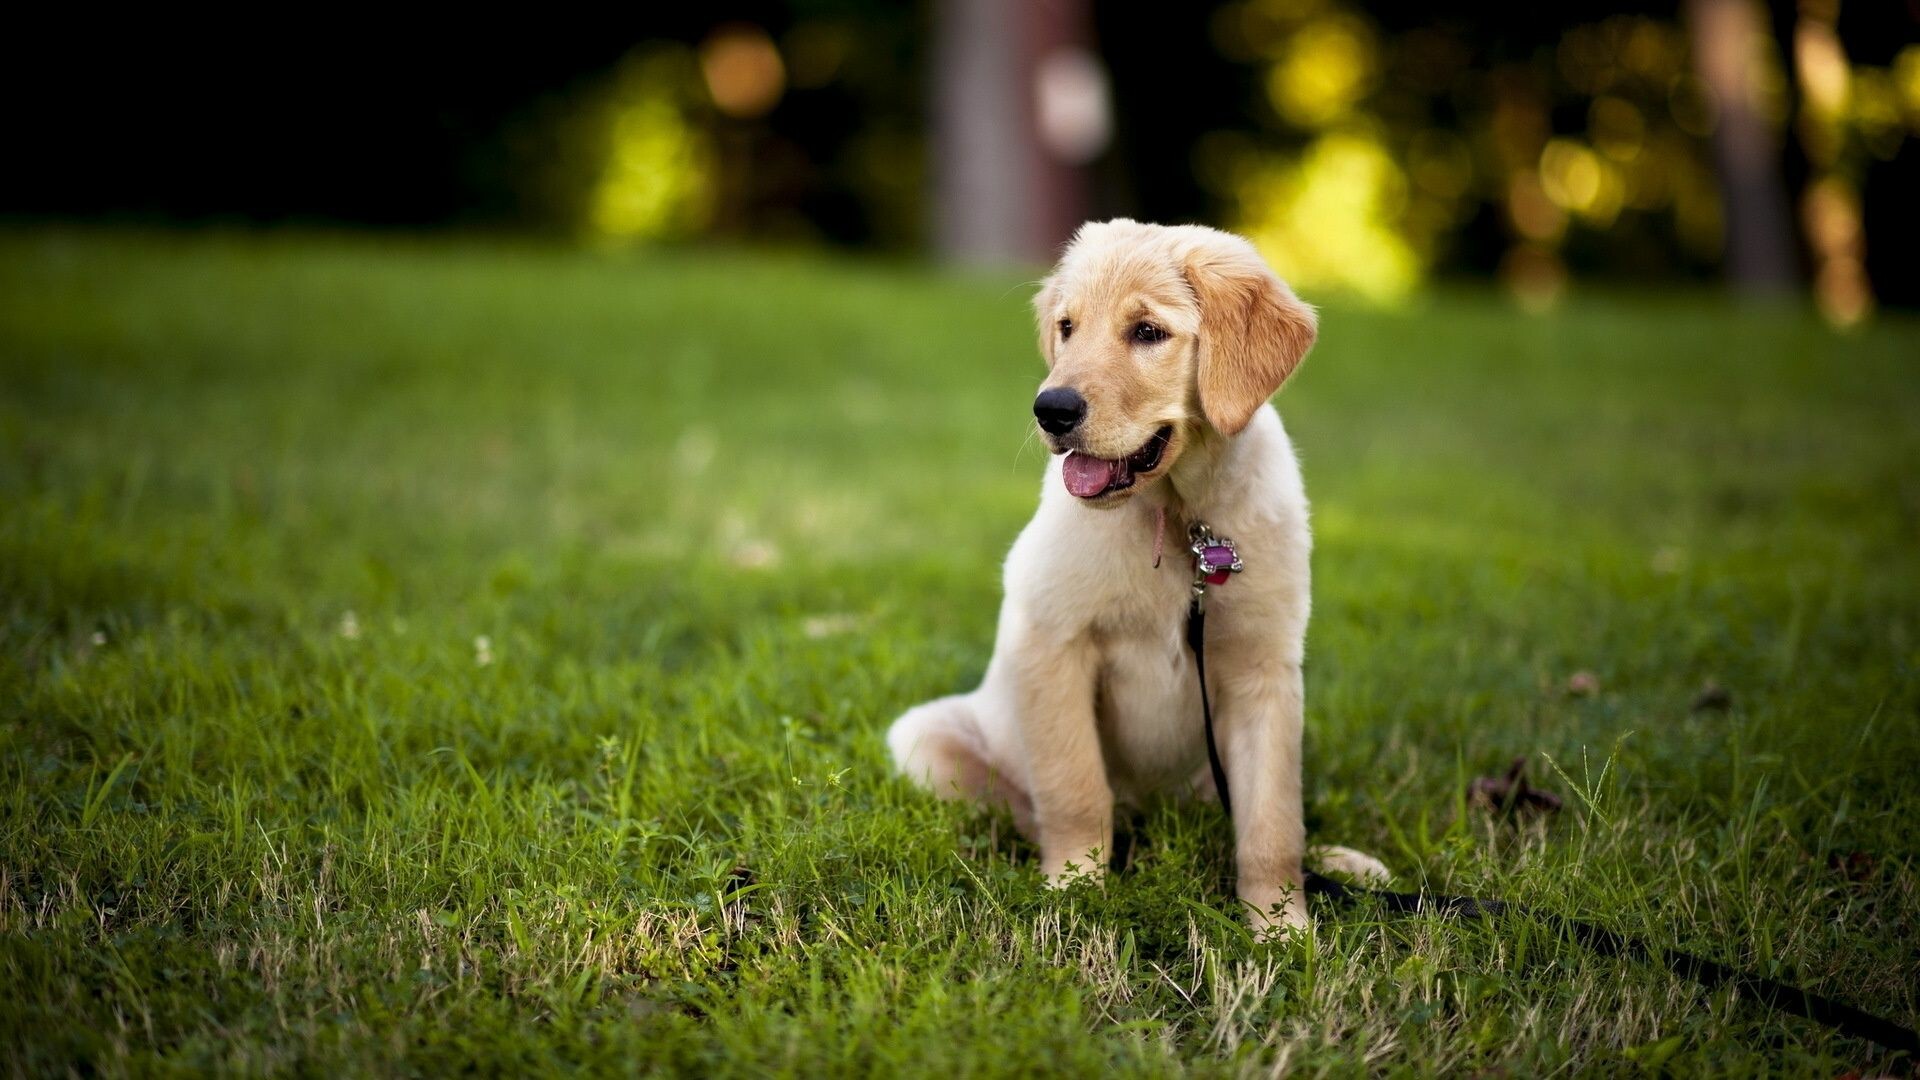 Undefined labrador puppies wallpapers, Plethora of wallpapers, Heart-melting cuteness, Labradors galore, 1920x1080 Full HD Desktop